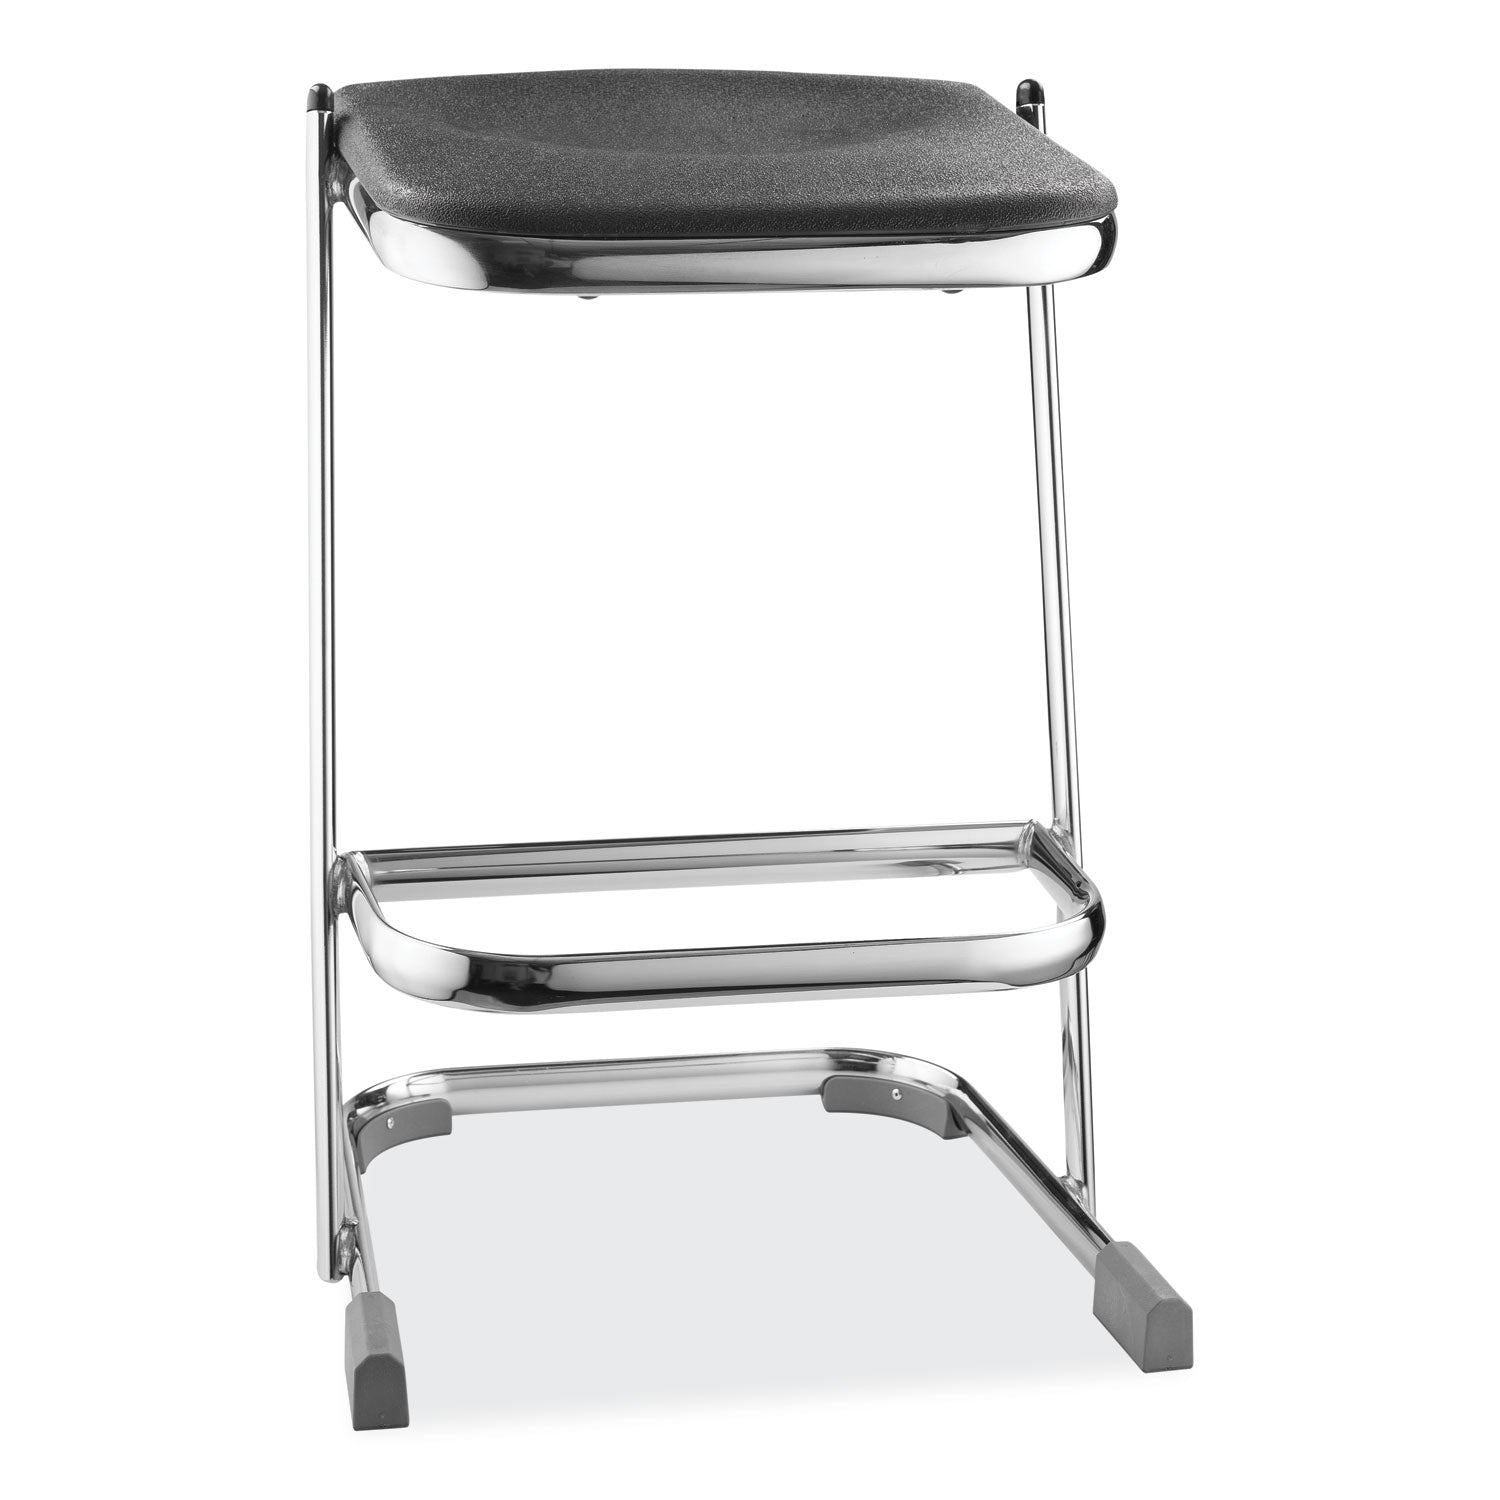 6600-series-elephant-z-stool-backless-supports-up-to-500lb-24-seat-height-black-seat-chrome-frameships-in-1-3-bus-days_nps6624 - 2